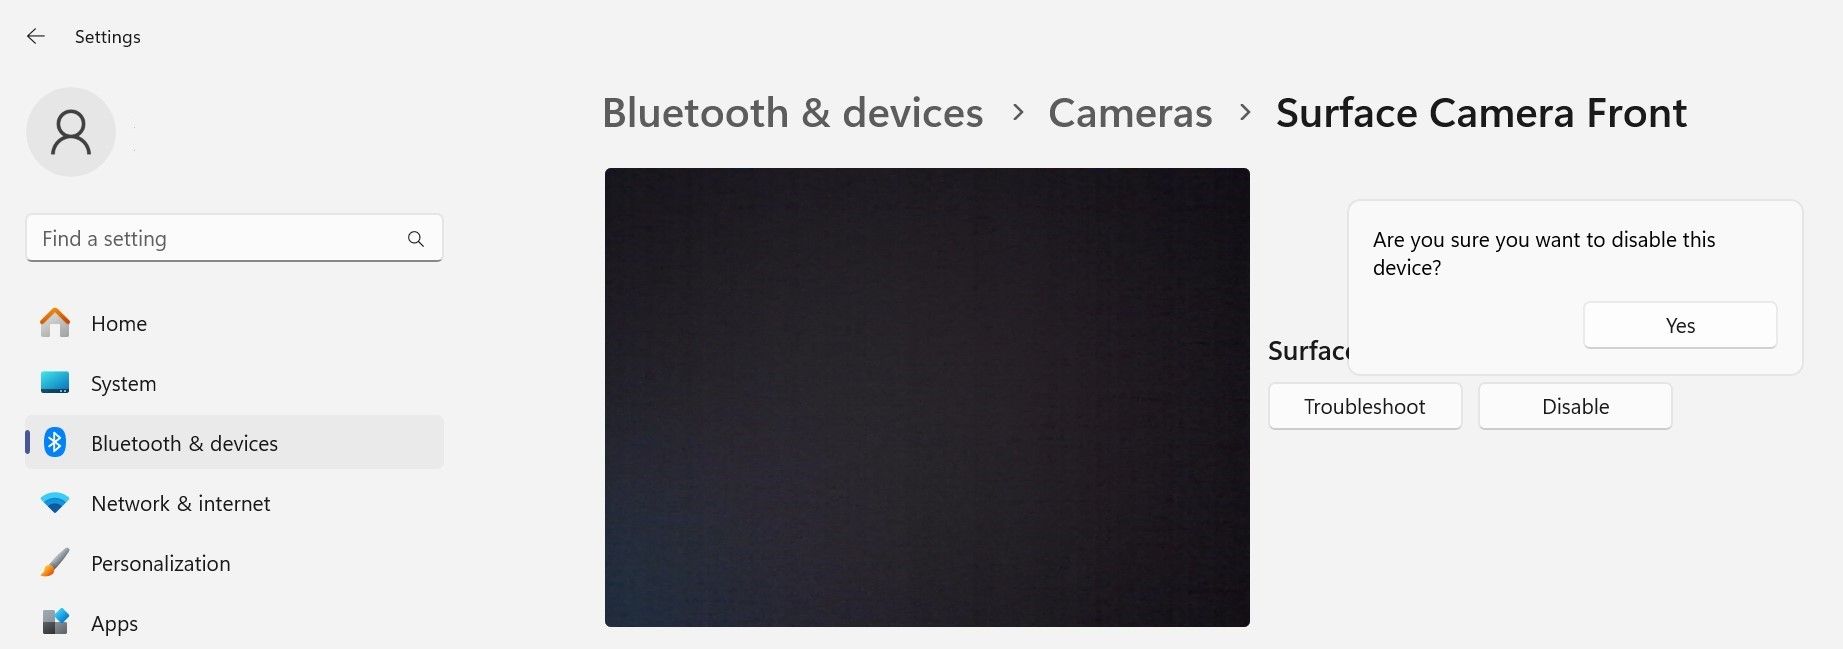 Disabling a camera device from the Windows Ssettings